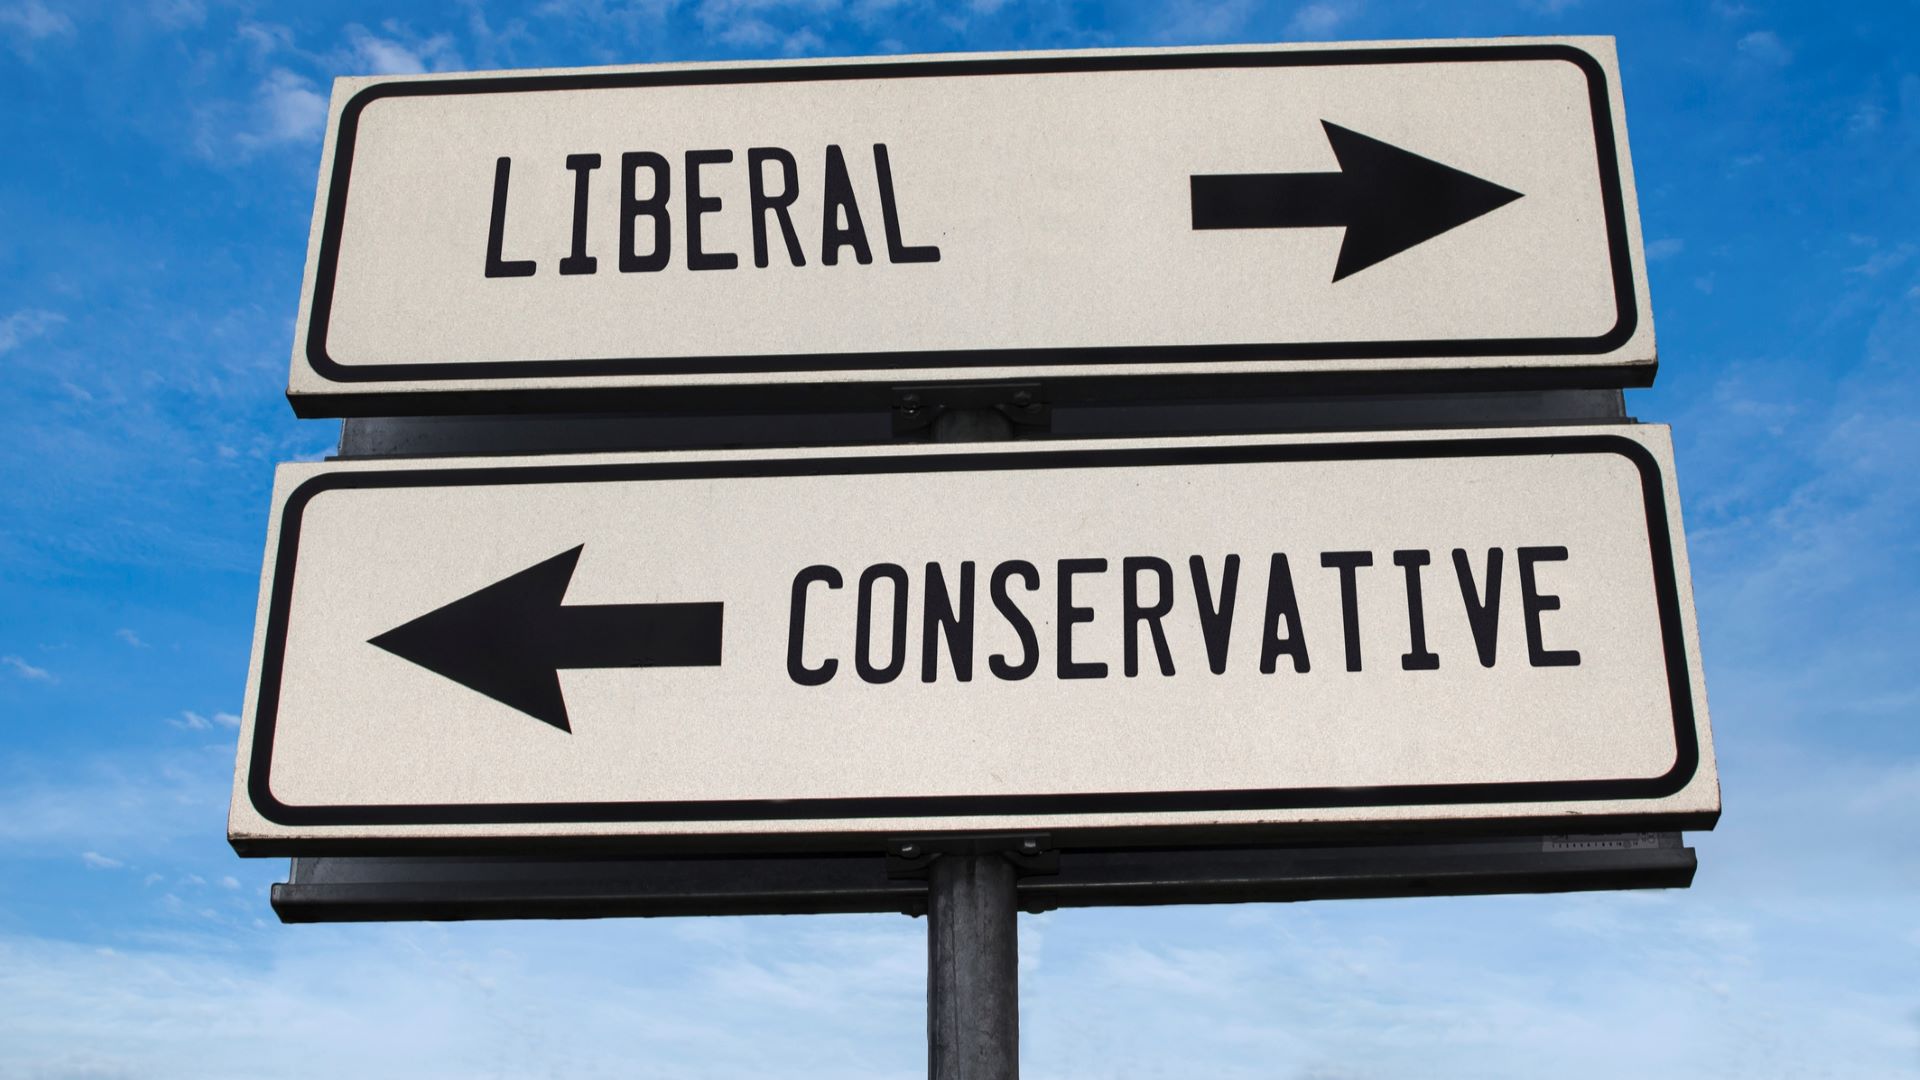 Are you conservative, liberal or moderate?